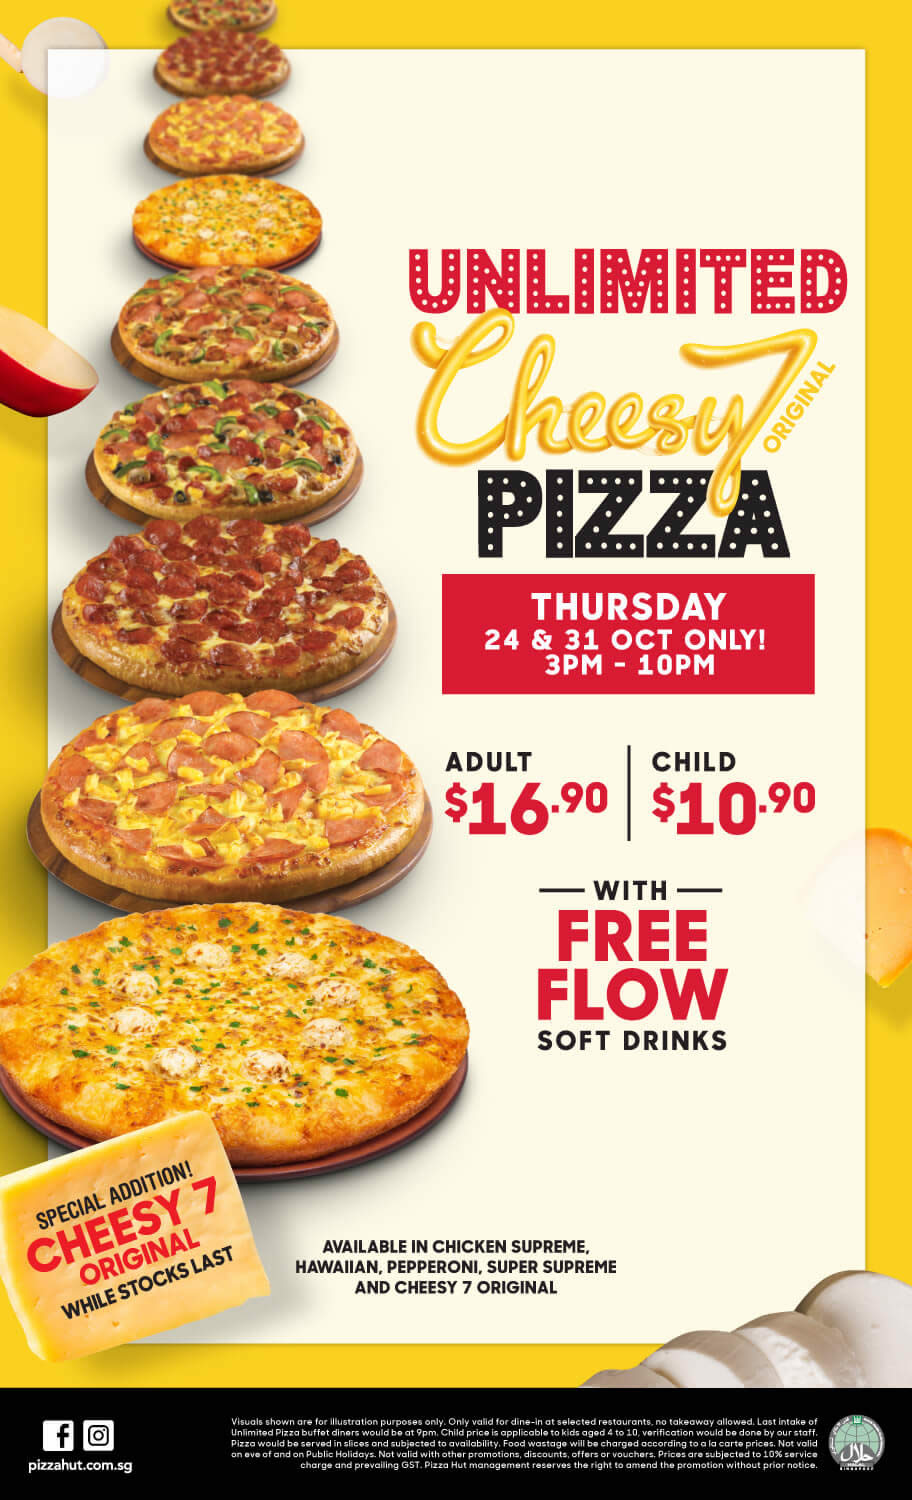 Pizza Hut: Enjoy an all-you-can-eat pizza buffet with free flow soft drinks  every Thursday from 3pm – 10pm!